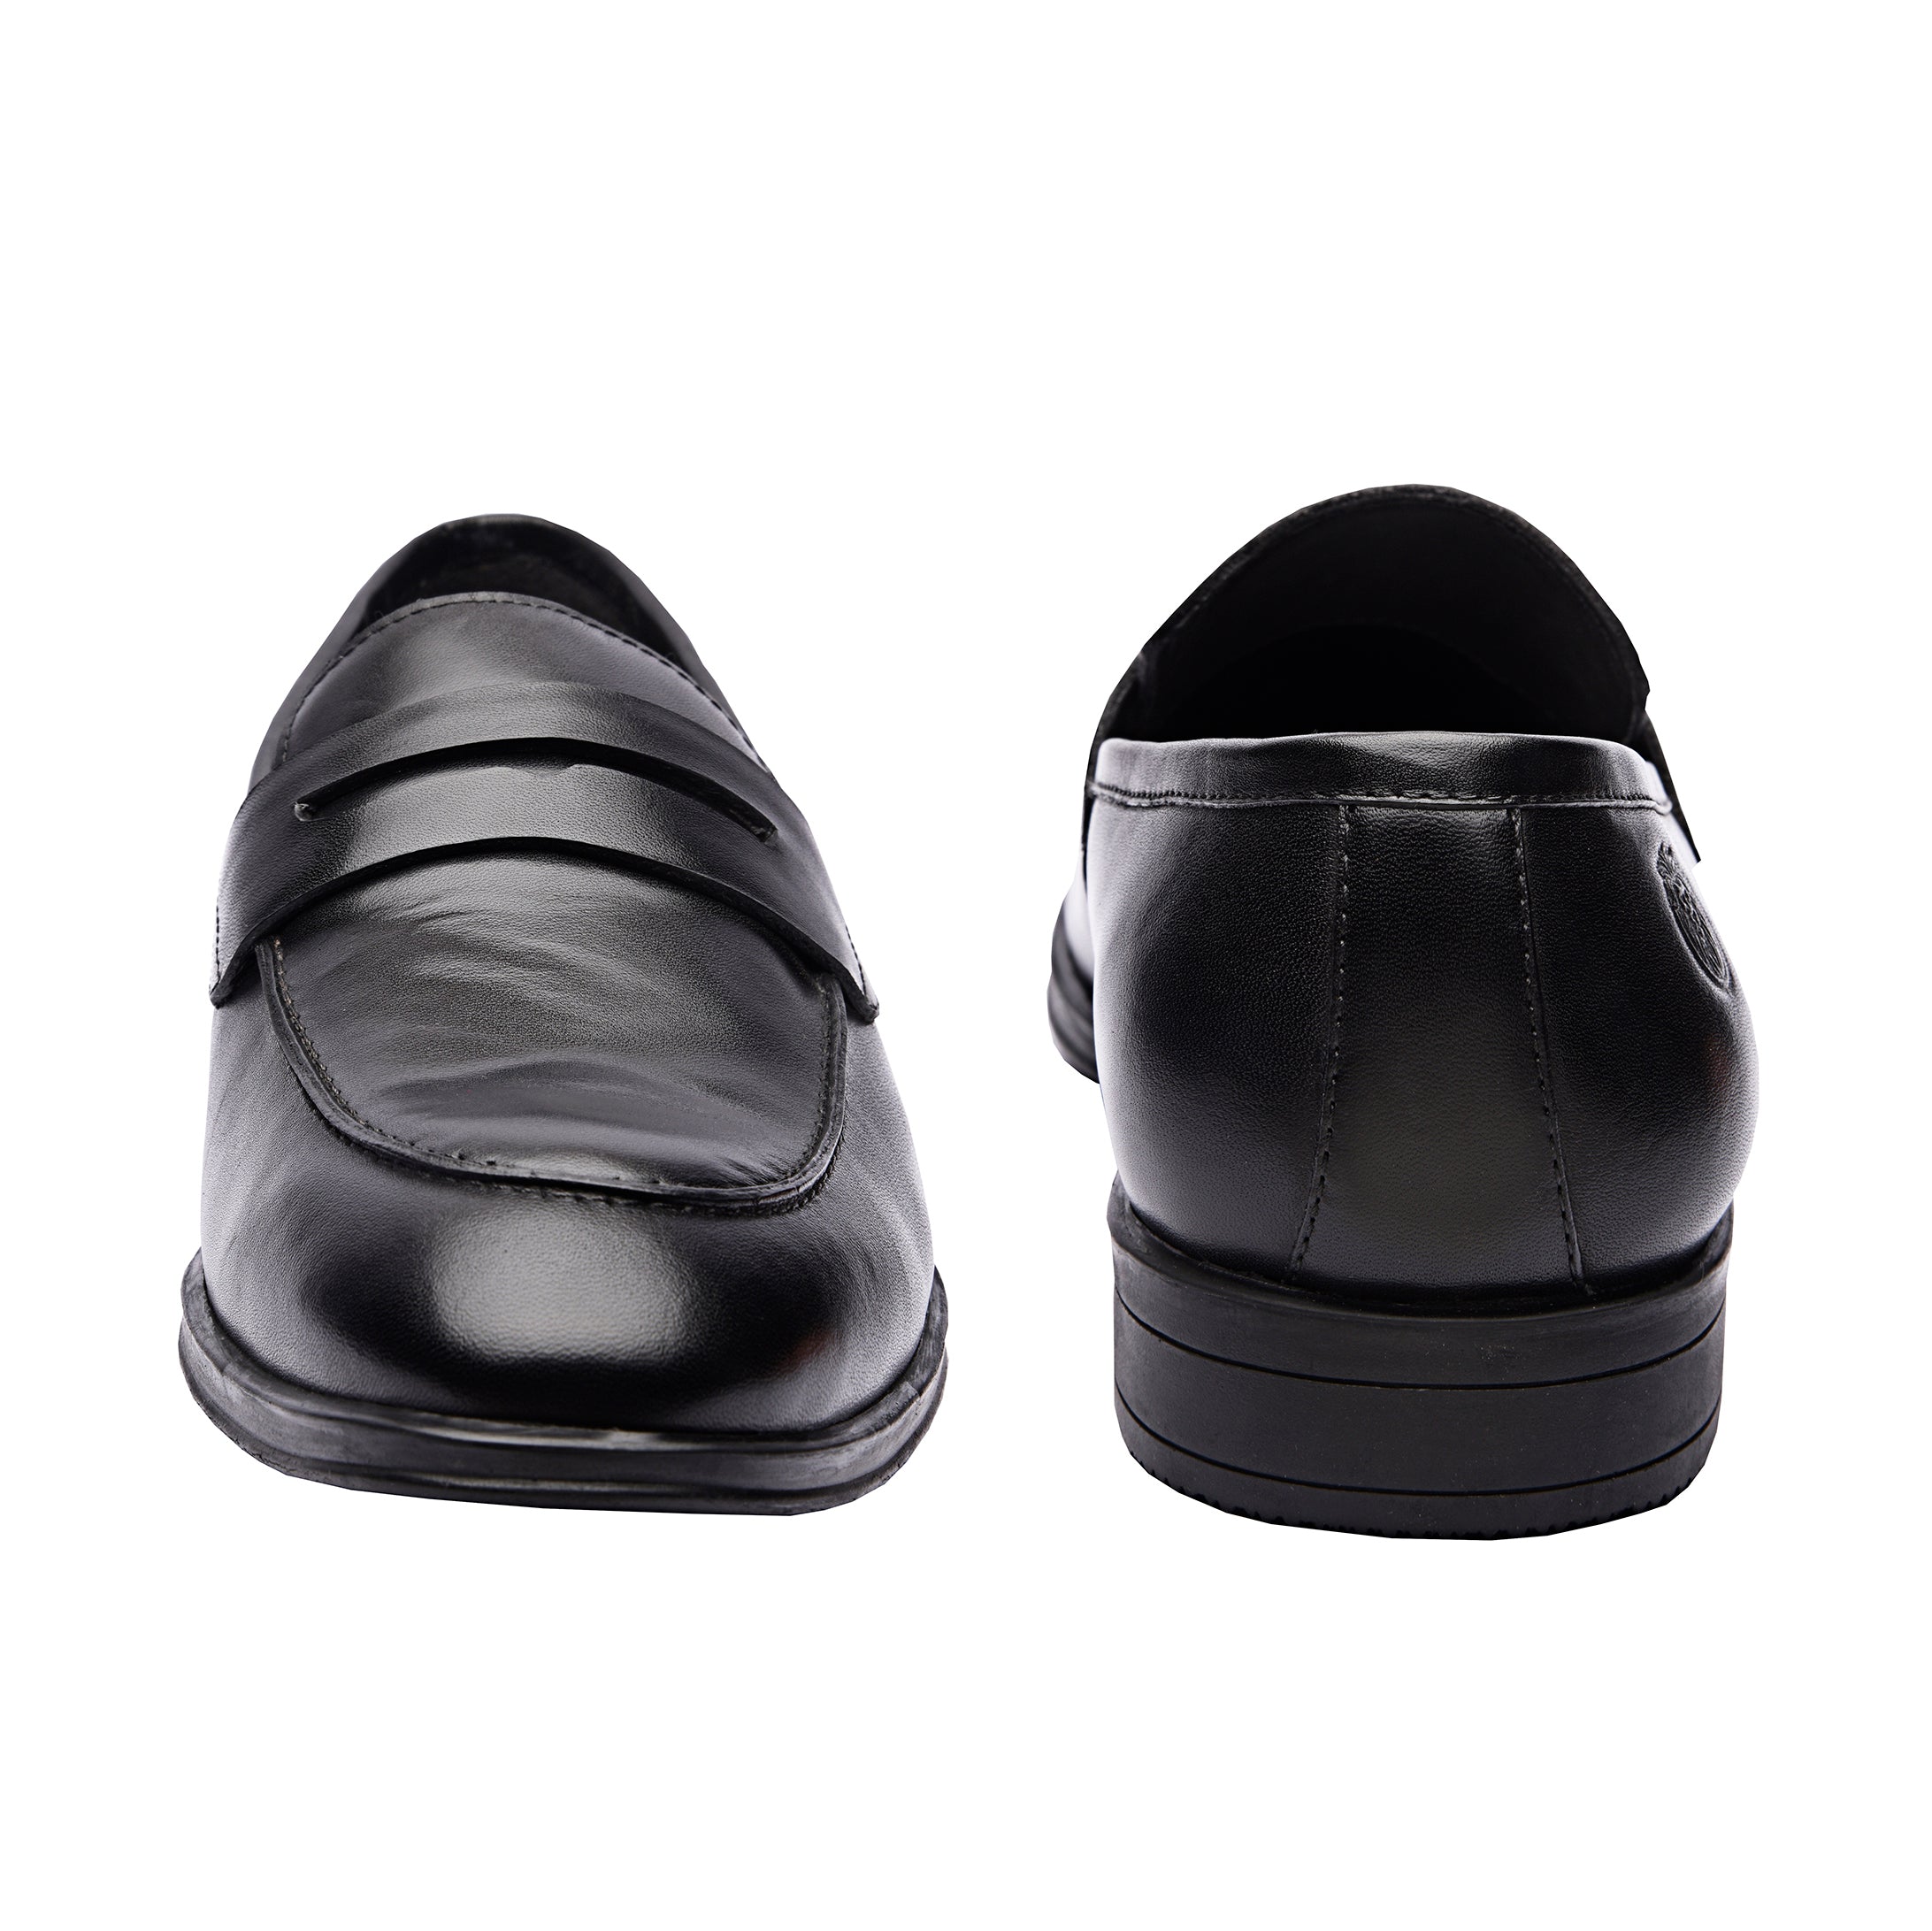 Samuel Classic Penny Loafers